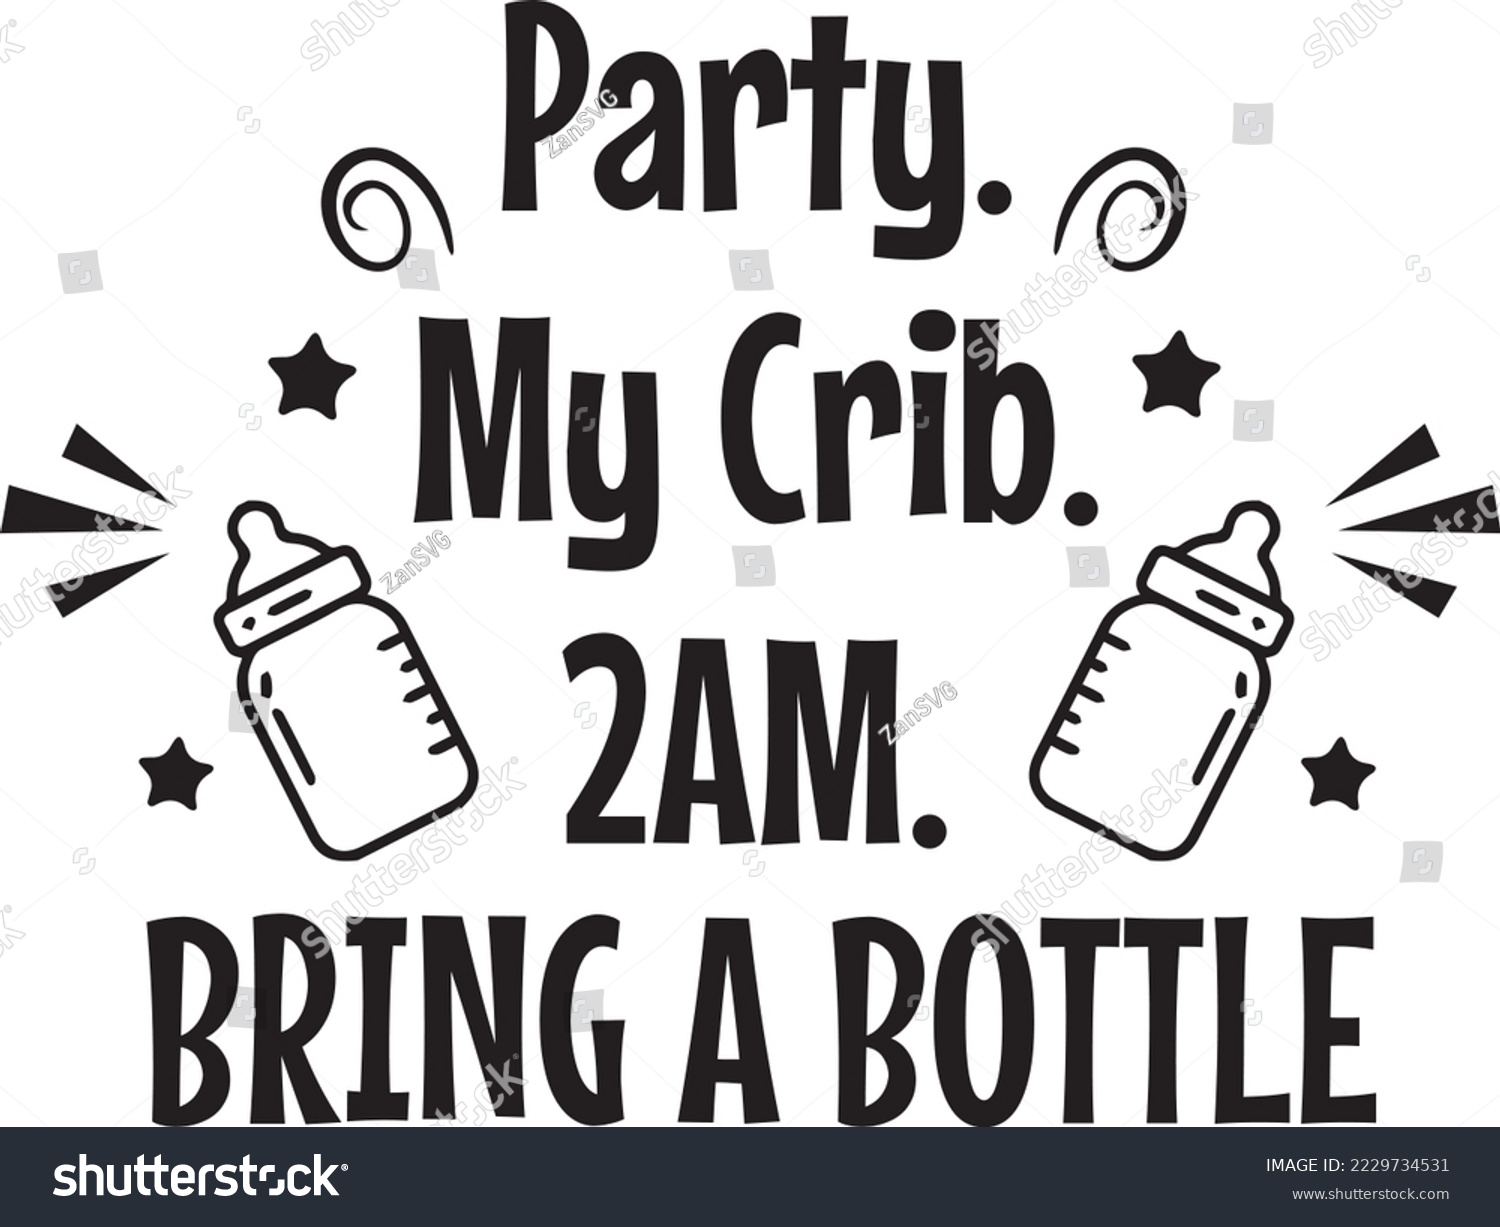 SVG of Party My Crib 2AM Bring a bottle vector file, Baby svg design svg